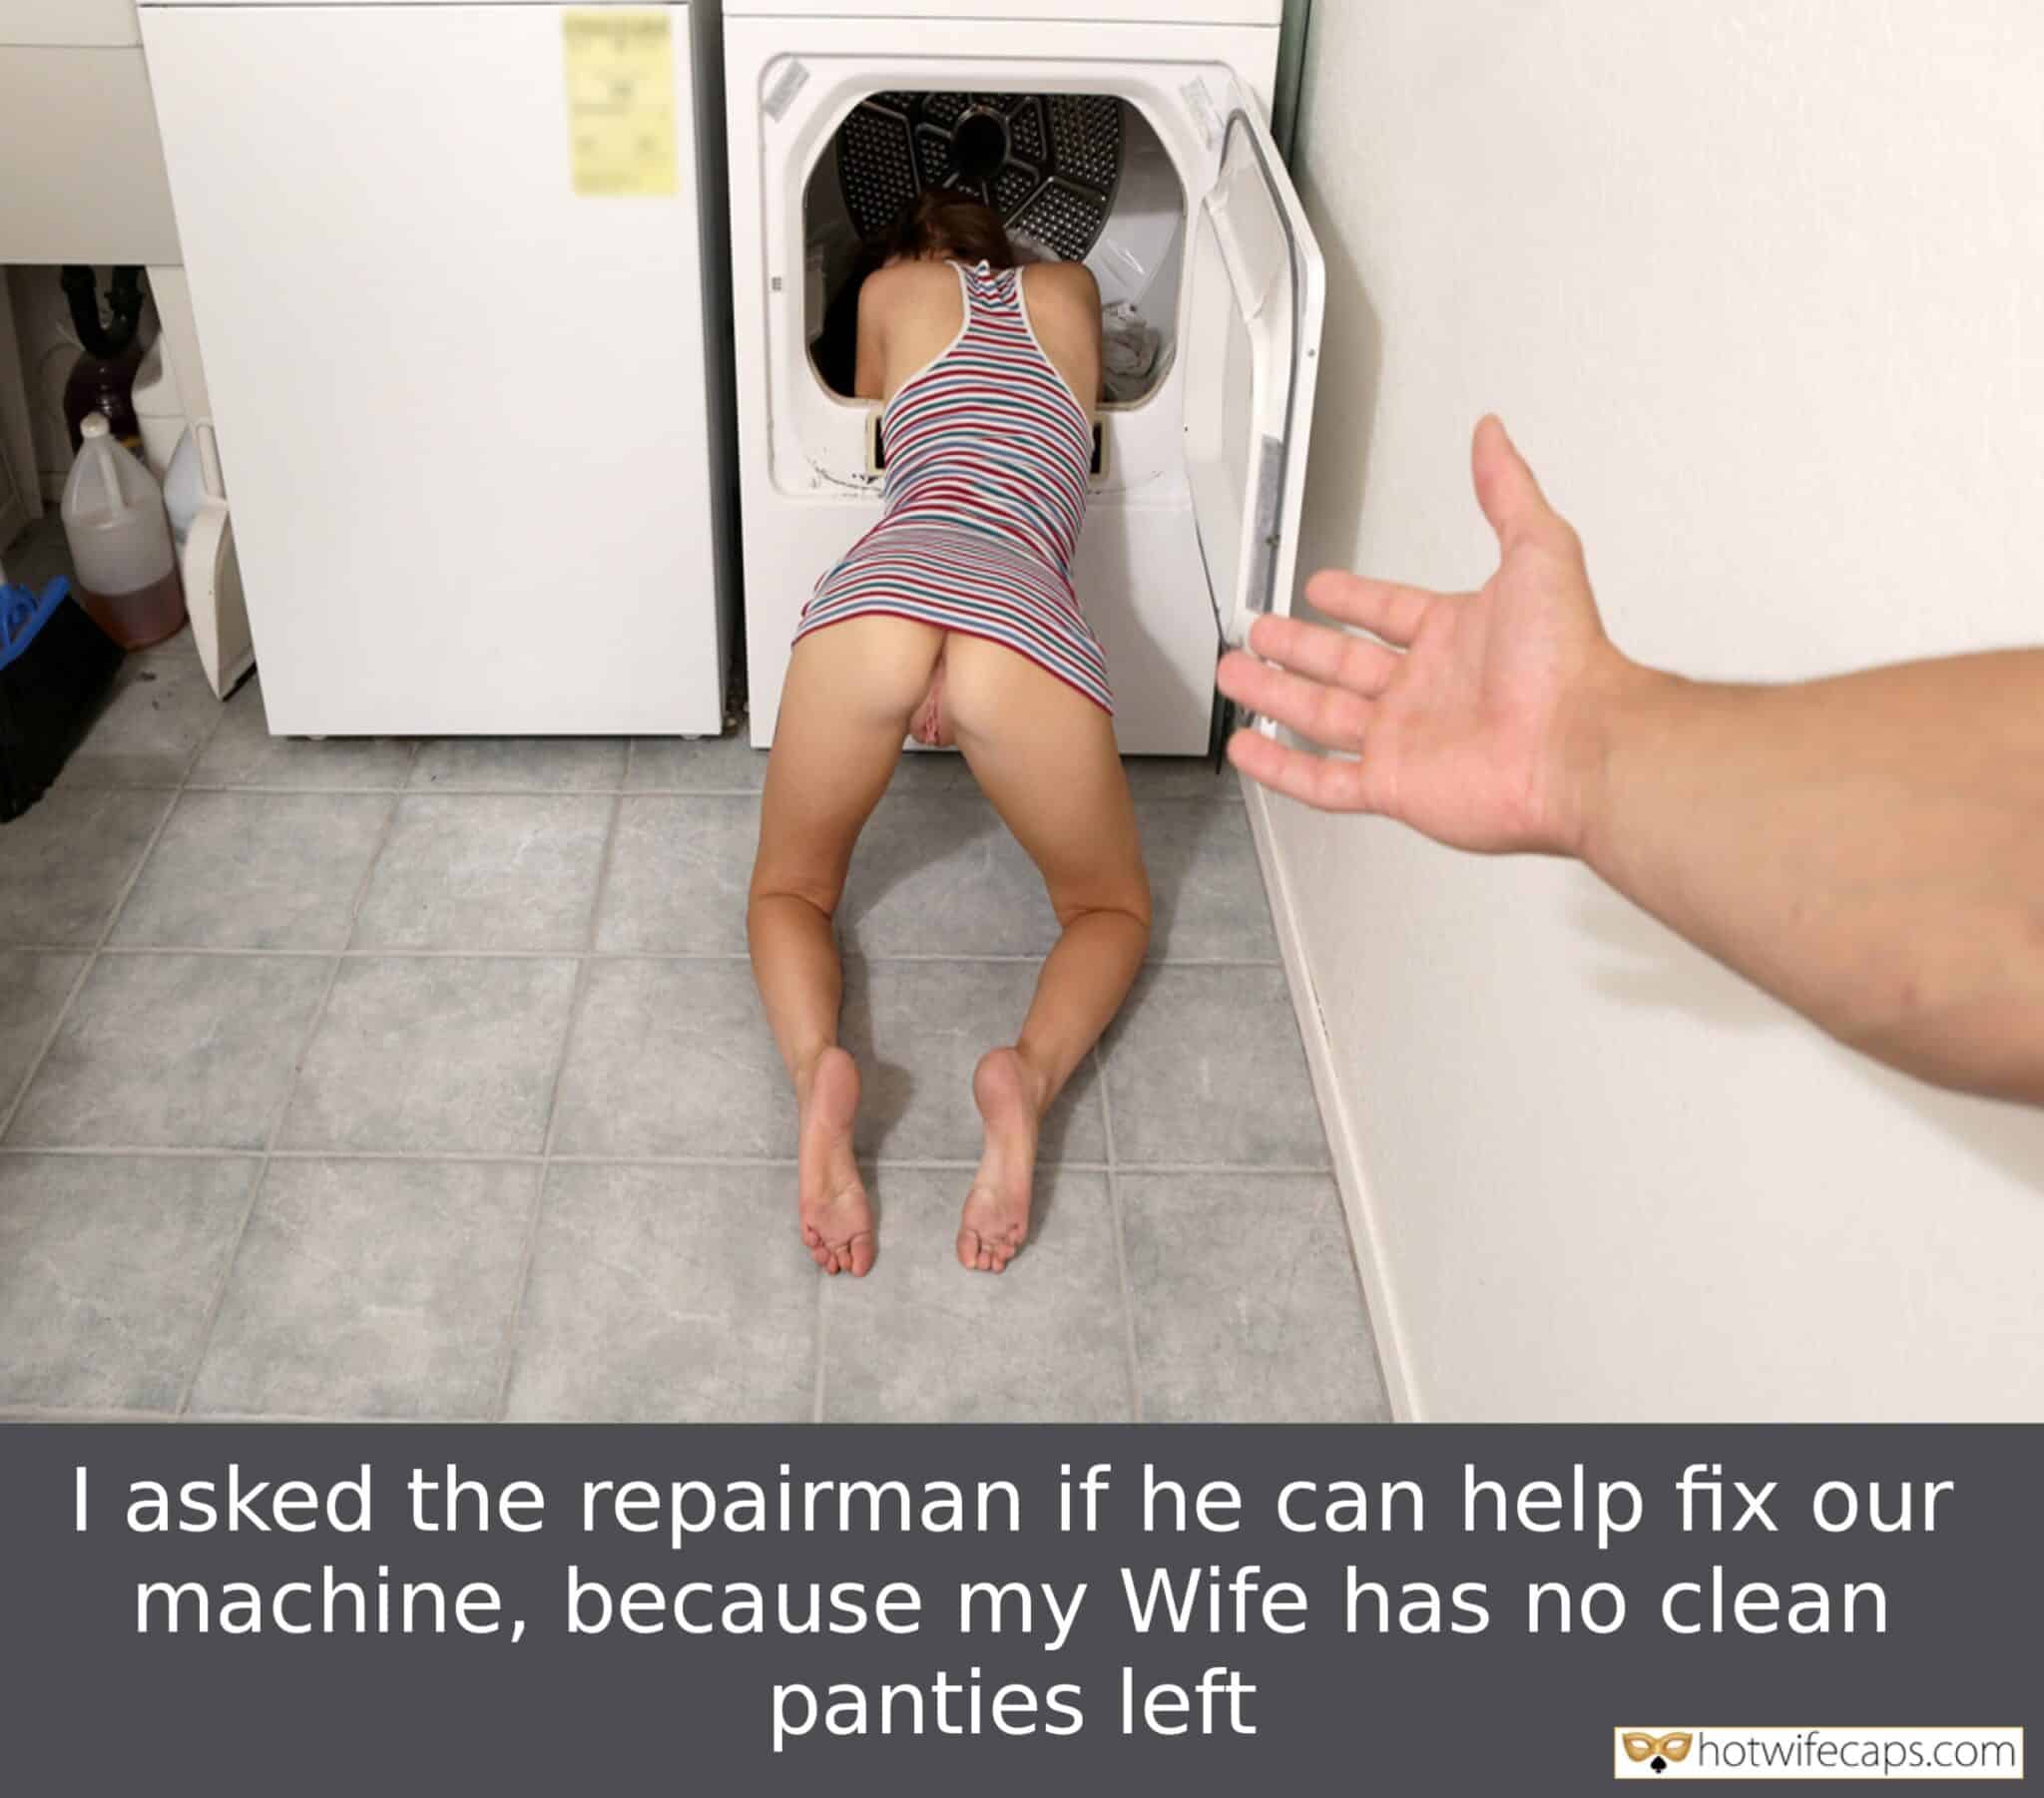 Wife Sharing No Panties Flashing Bottomless hotwife caption: I asked the repairman if he can help fix our machine, because my Wife has no clean panties left cuckold wife captions tumblr Offering Wife’s Bare Asspussy to Repair Man